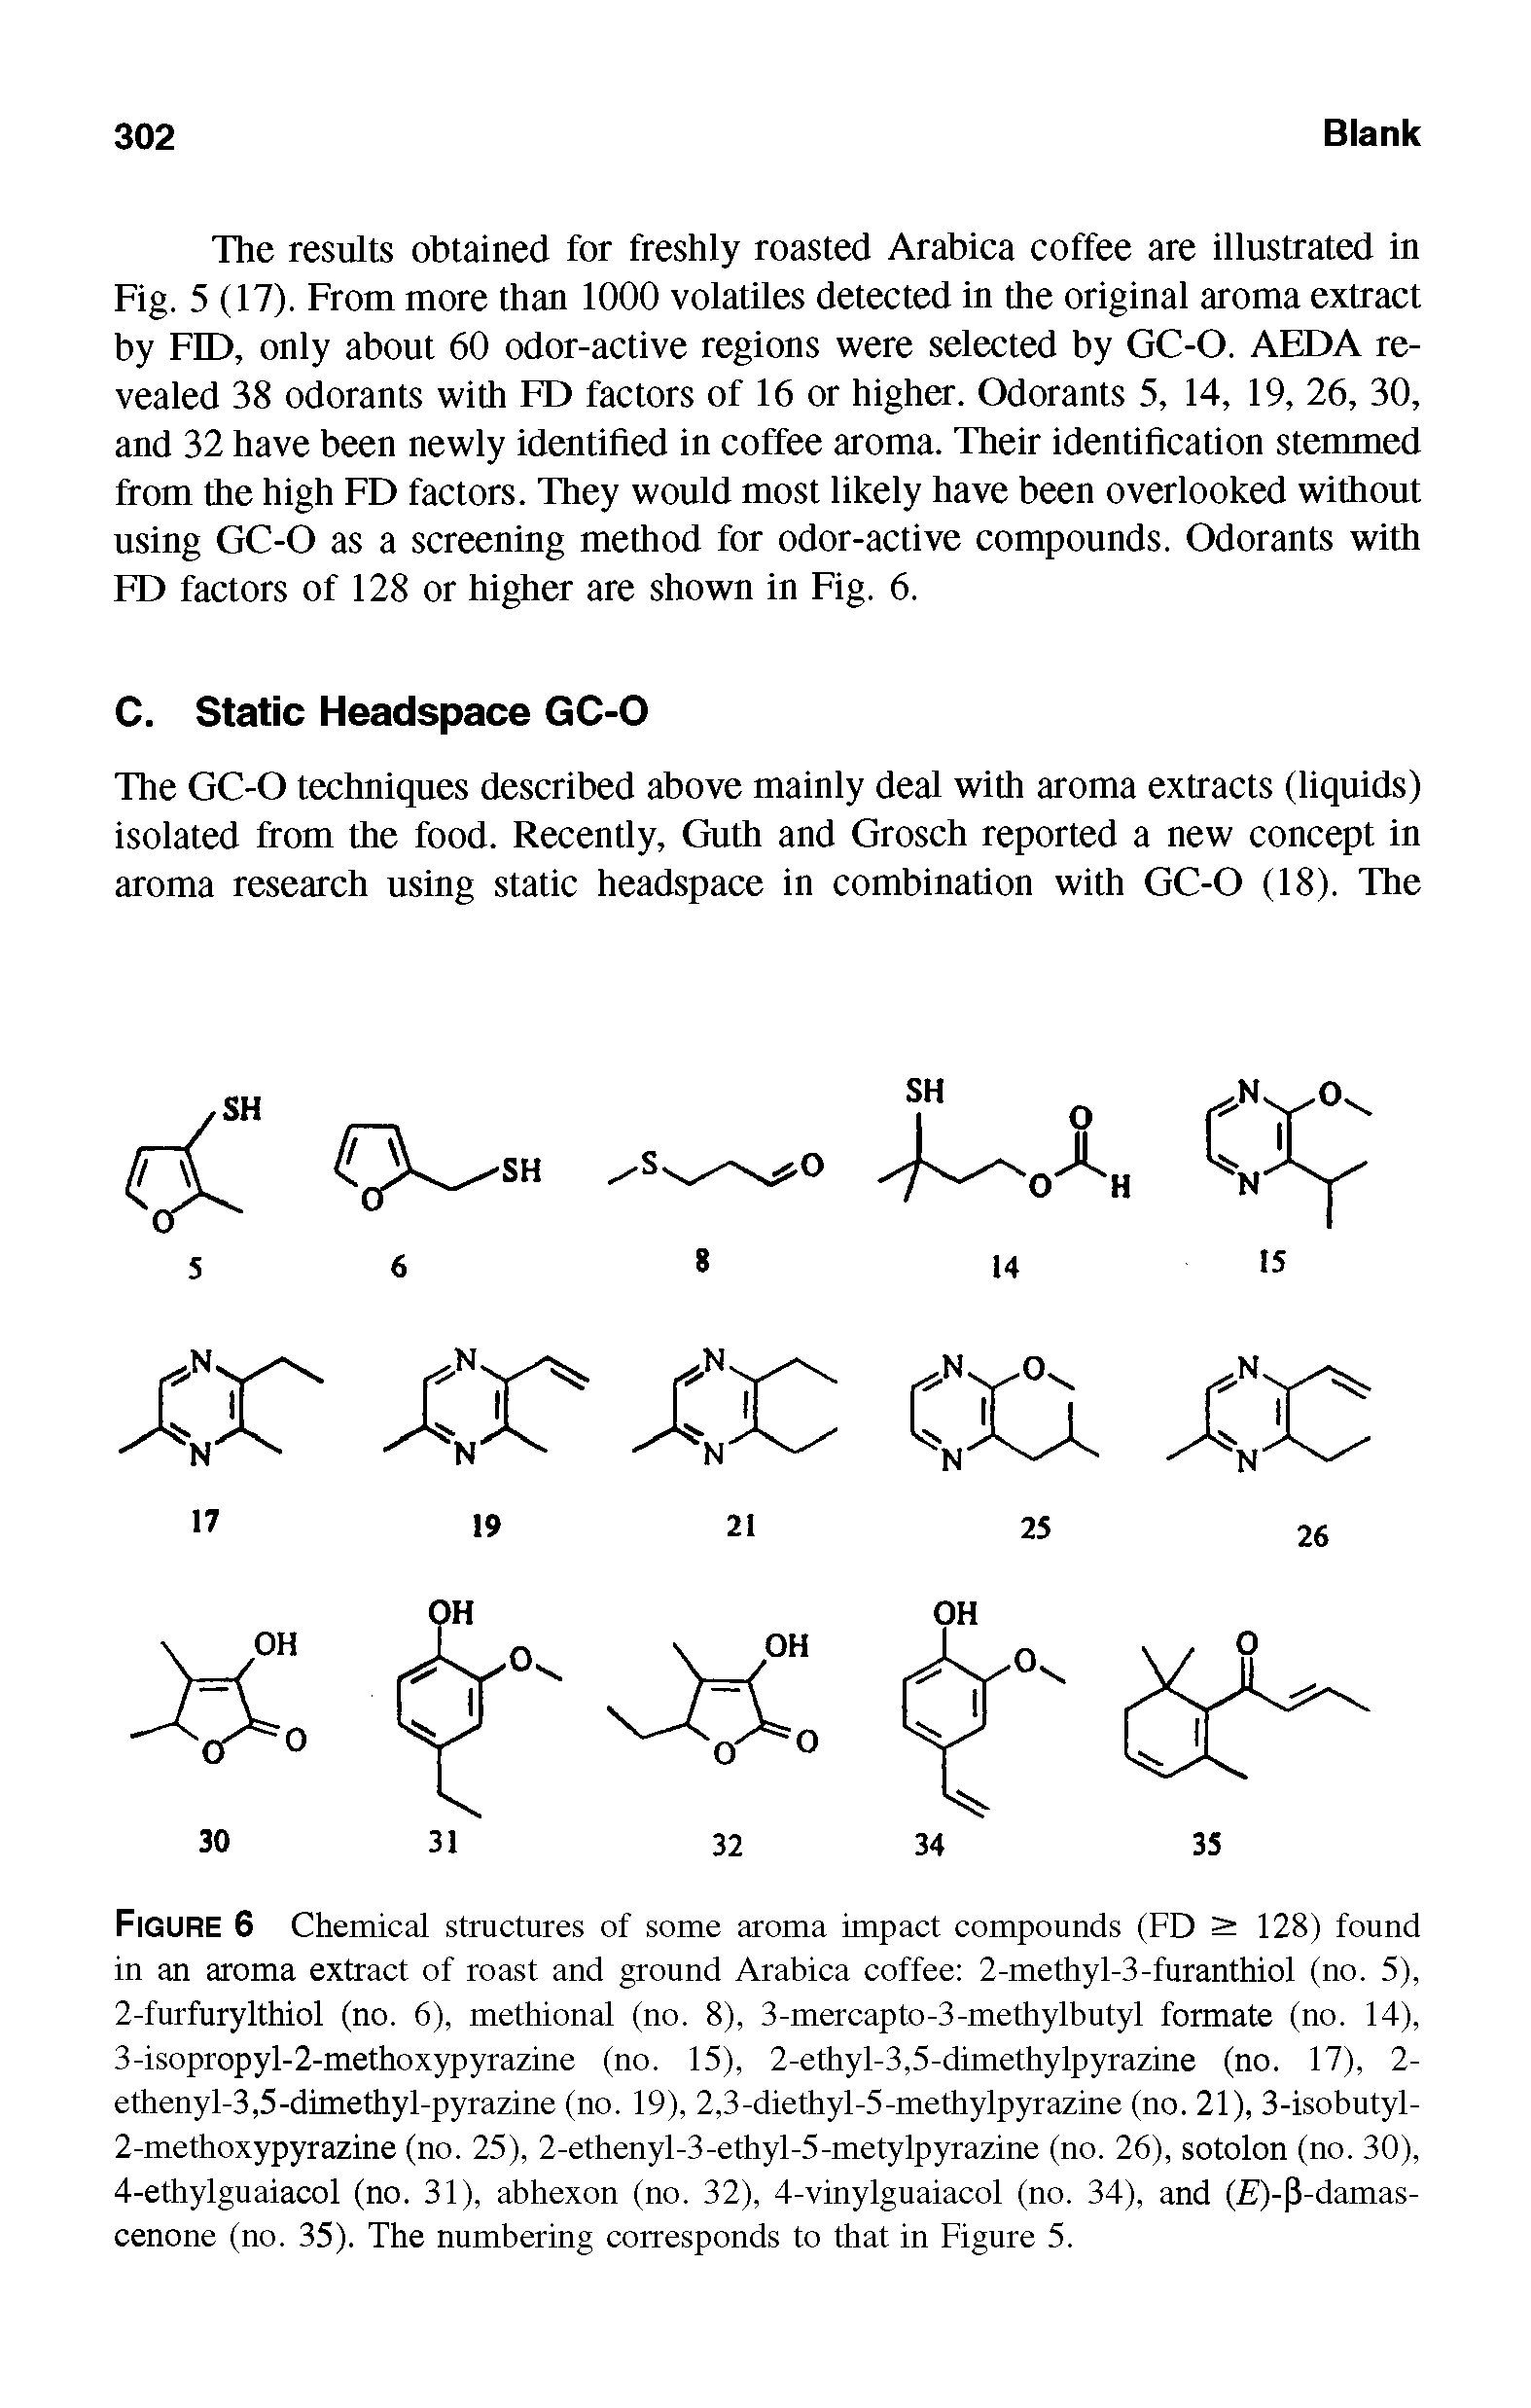 Figure 6 Chemical structures of some aroma impact compounds (FD > 128) found in an aroma extract of roast and ground Arabica coffee 2-methyl-3-furanthiol (no. 5),...